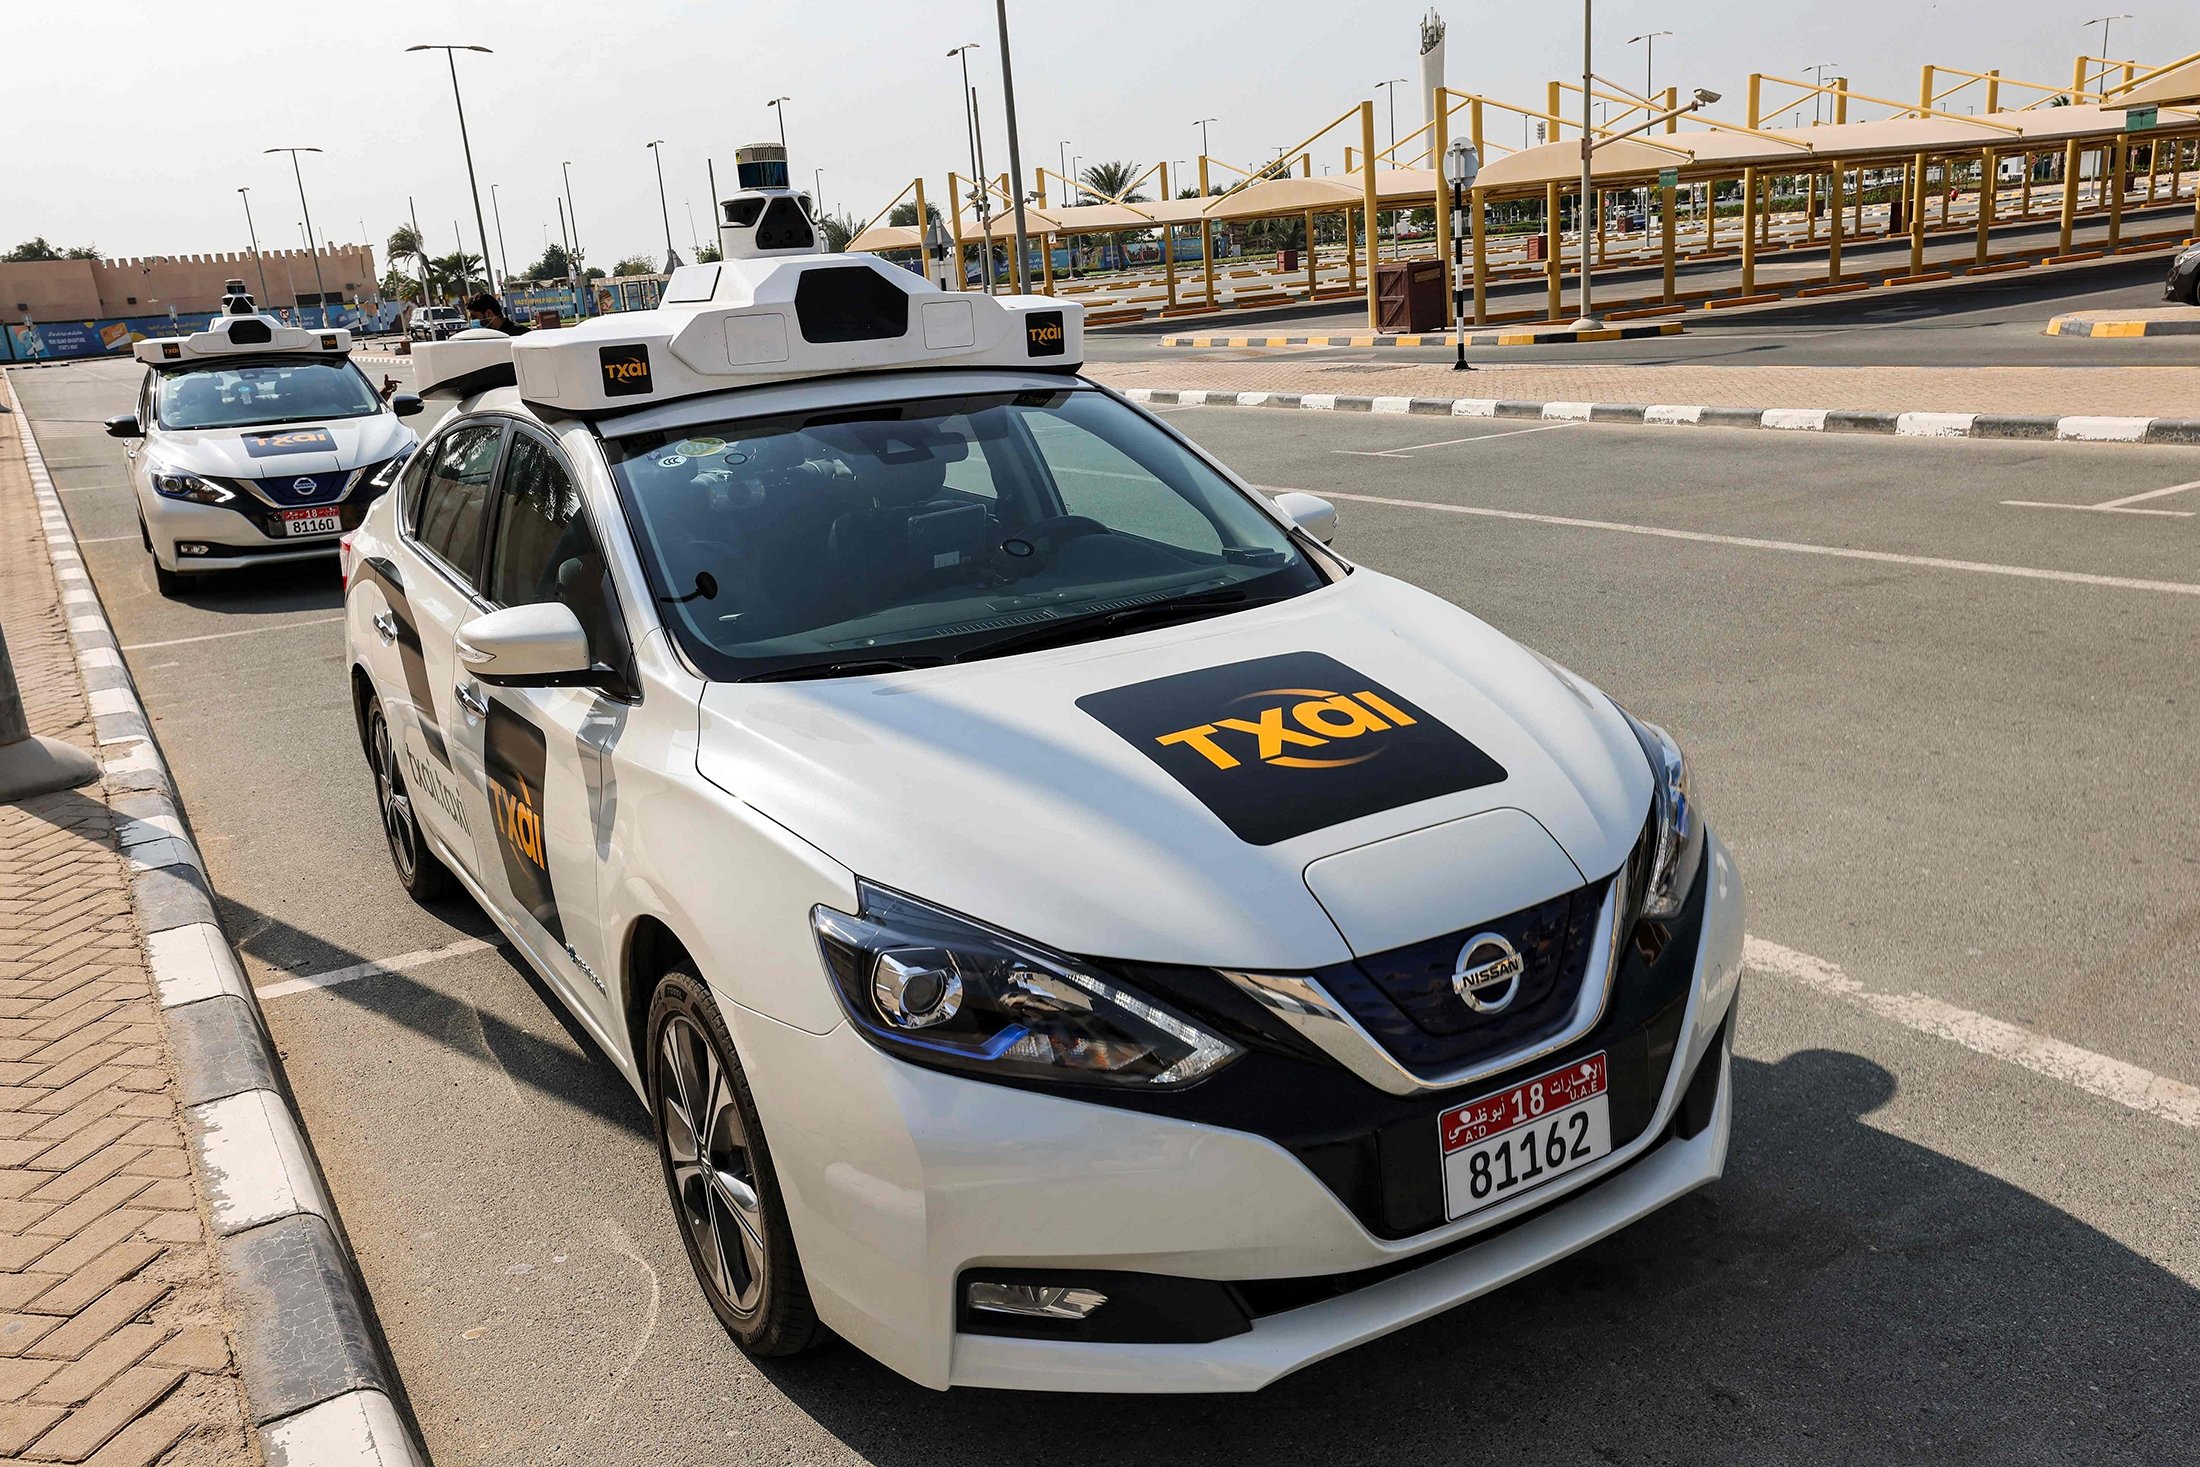 One of the self-driving taxis being used in a tech demonstration to transport passengers to the nearby Yas Island, in the capital Abu Dhabi, United Arab Emirates, Nov. 30, 2021. (AFP Photo)